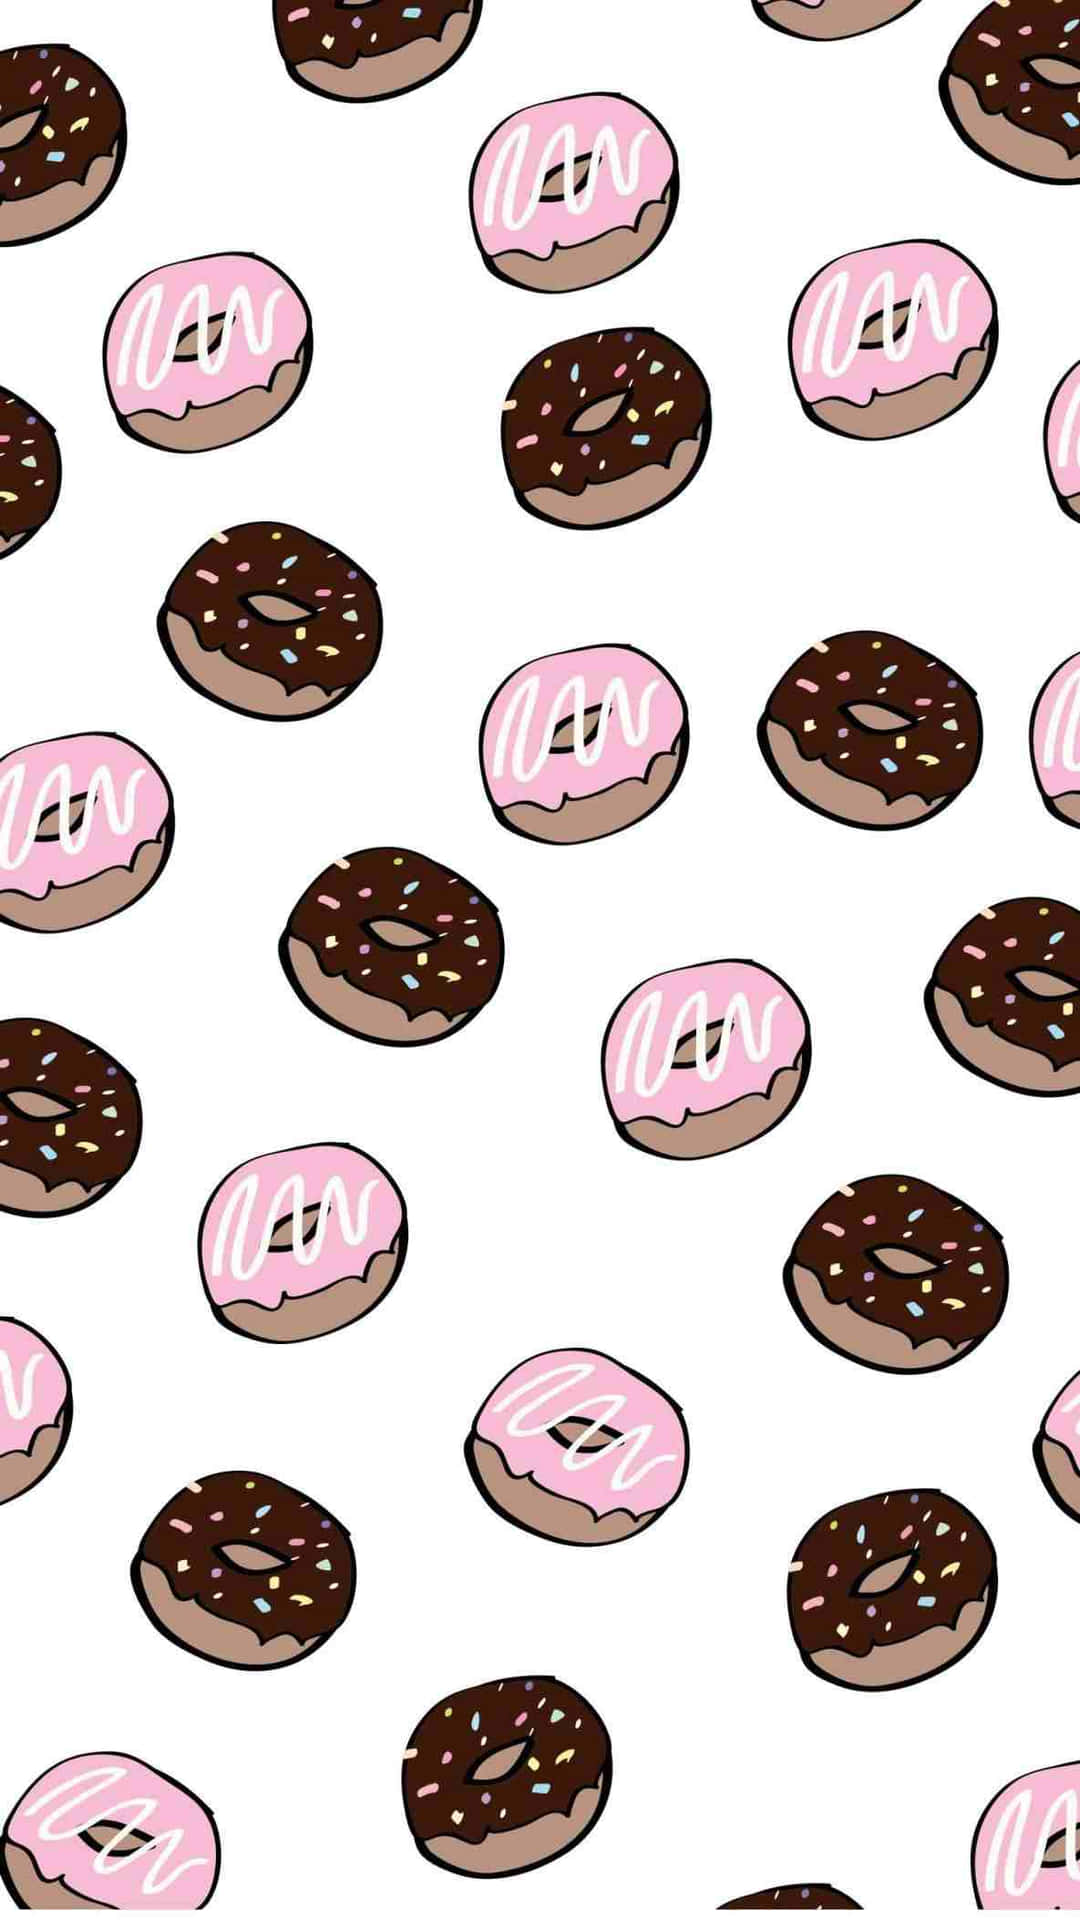 Adorable Donut with Sprinkles and a Smile Wallpaper